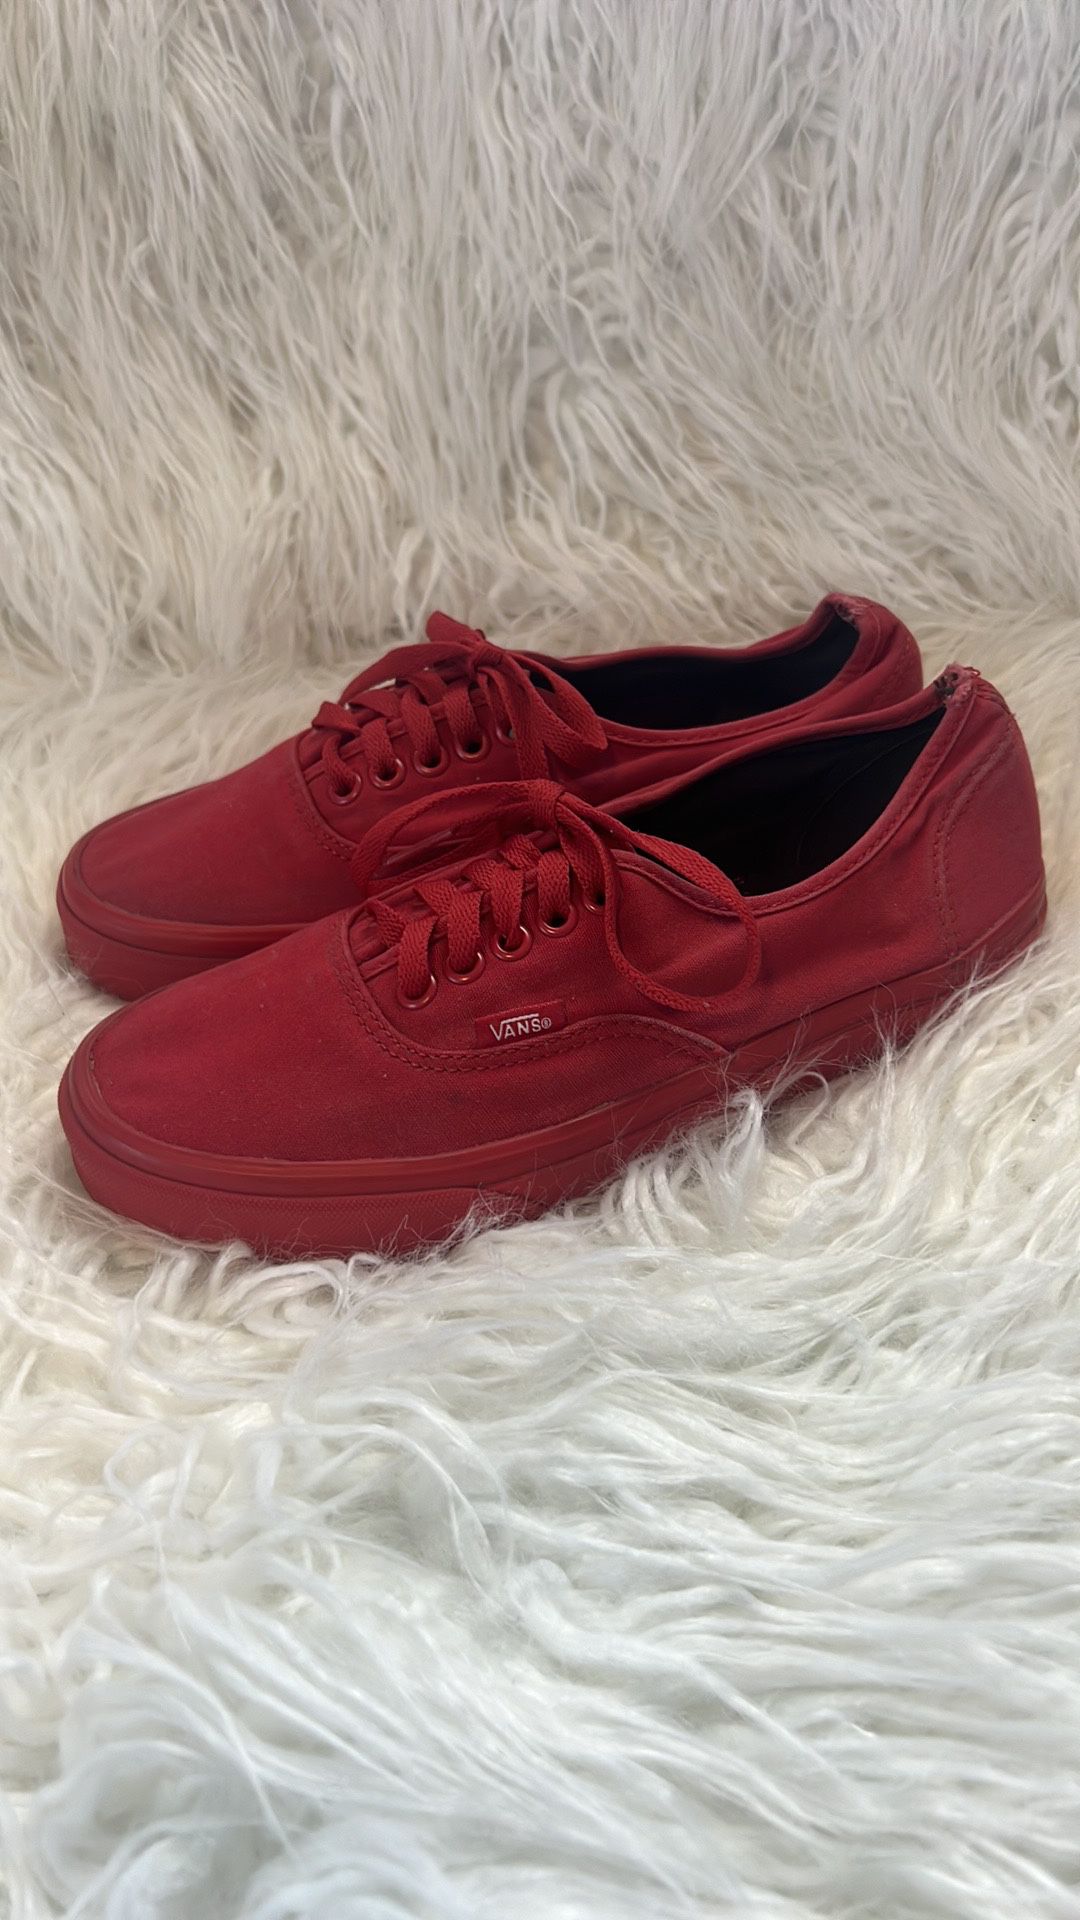 Vans All Red Athletic Shoes Mens Size 6.5 And Women’s Size 8